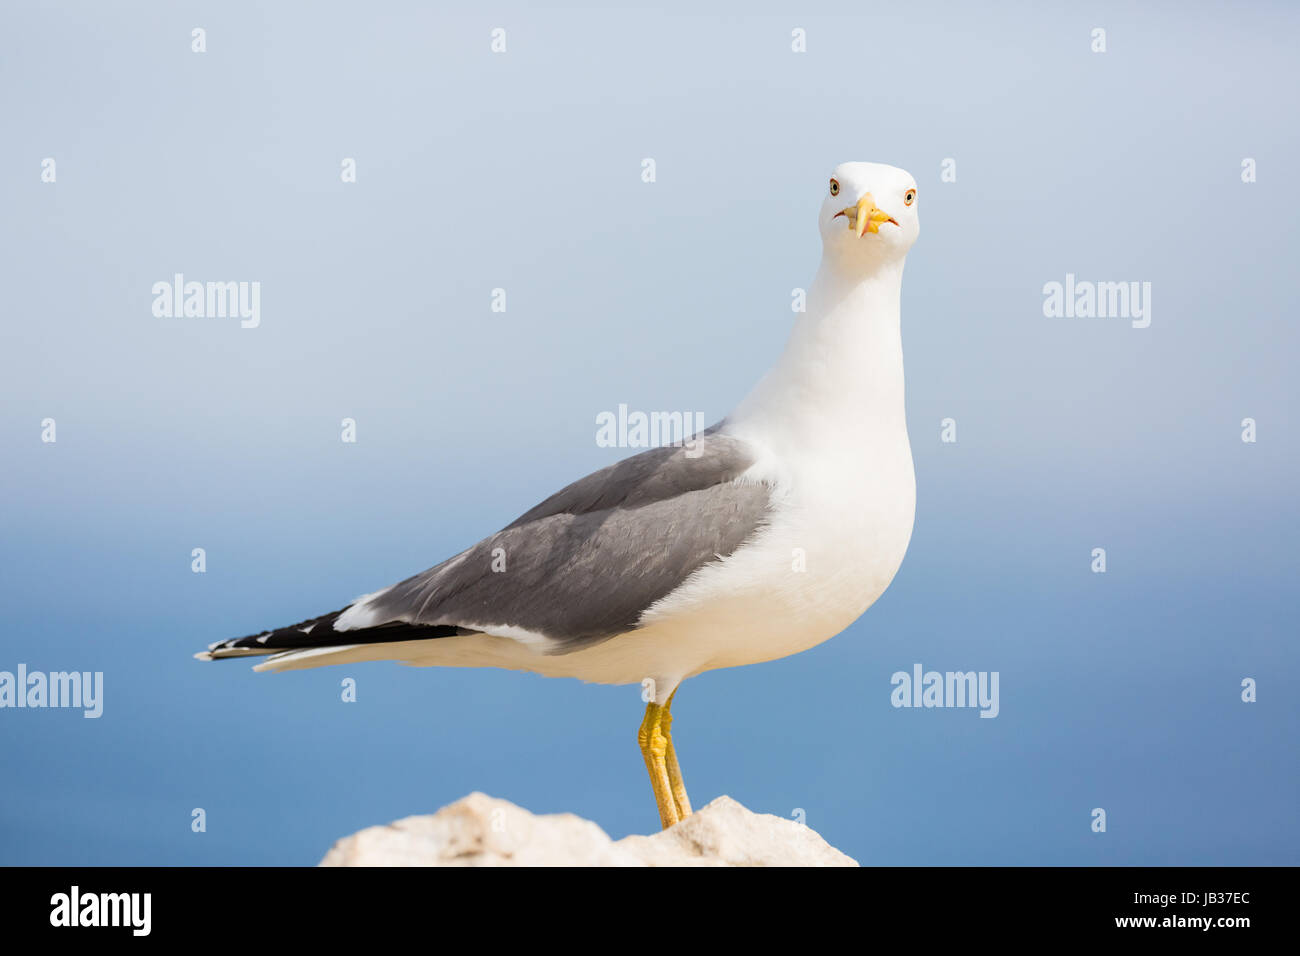 Seagull standing on rock Stock Photo